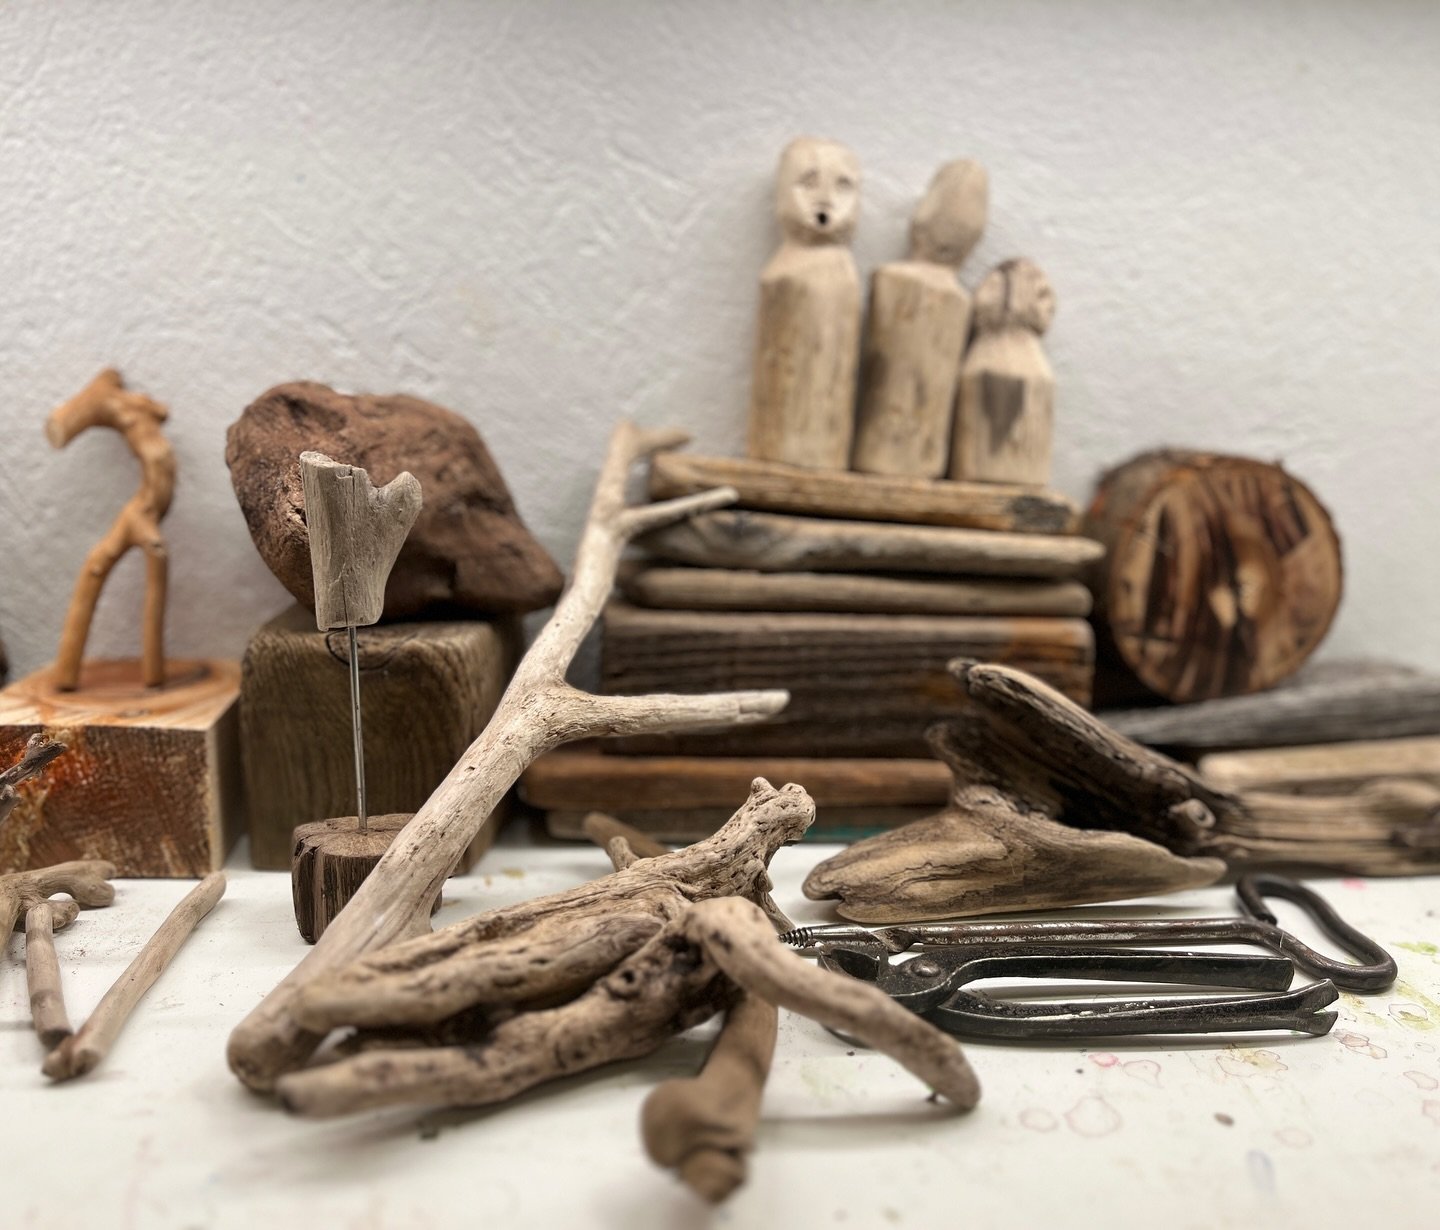 Taking a day off just cleaning up and organizing my tiny studio. I am in an in-between modus, thinking of what project to start next, driftwood or mixed media? I have a few ideas bubbling on my mind and I am as curious as you which one I will be the 